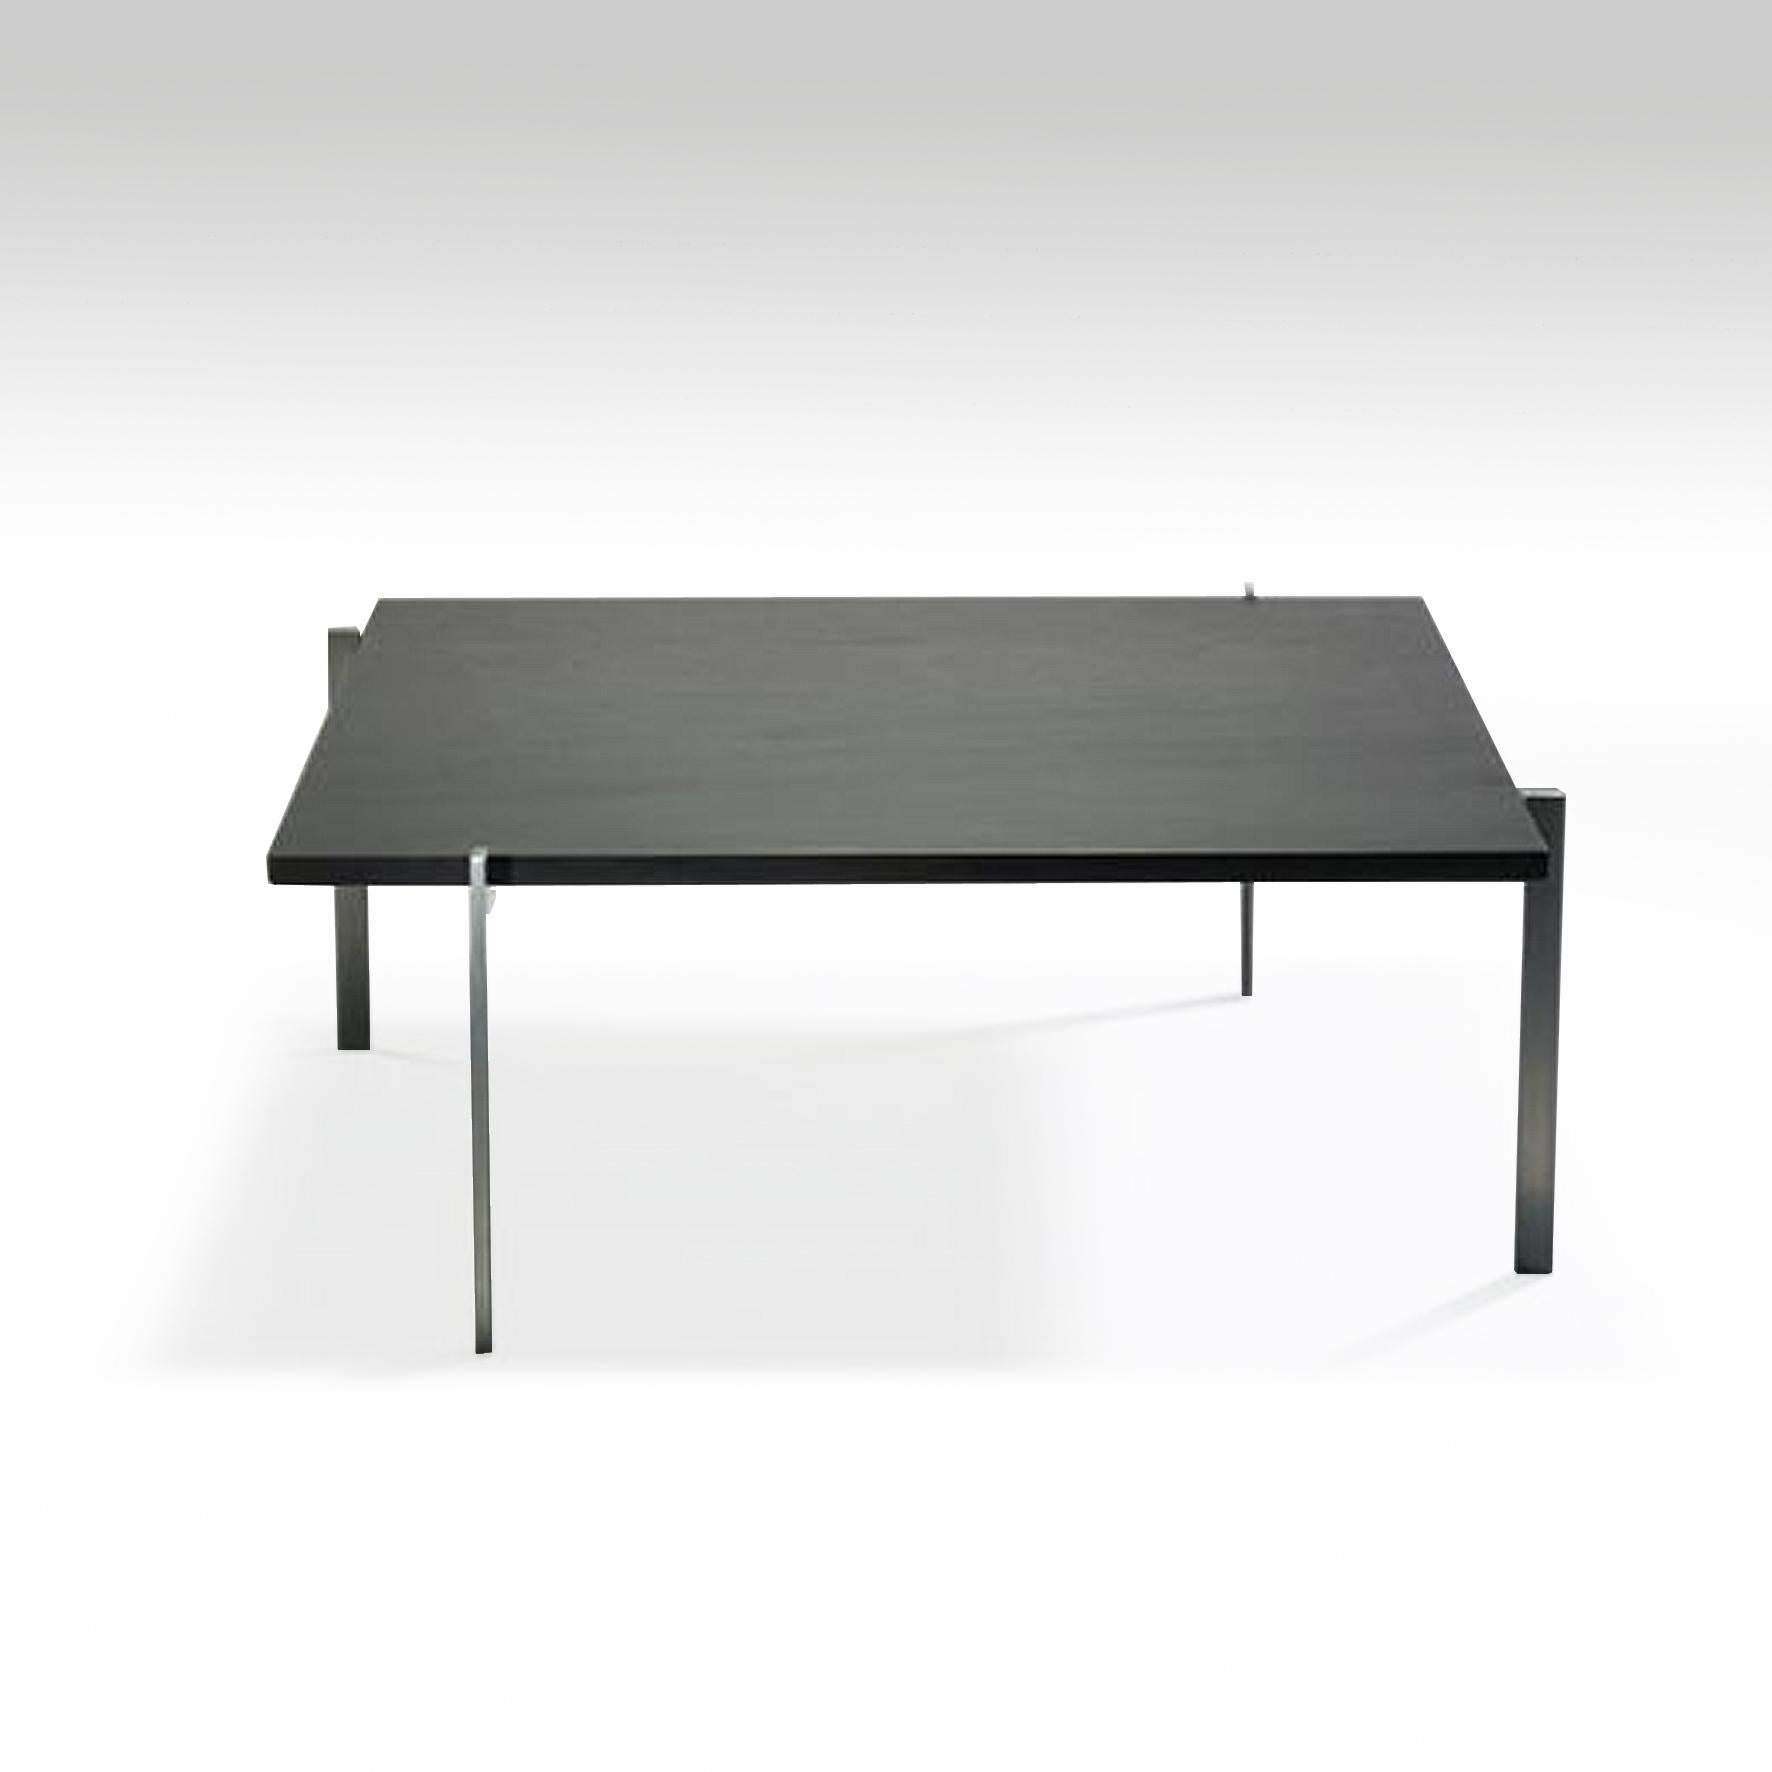 A square coffee table with a slate top on a four legs matte chrome-plated steel stand, 
Denmark.
Model created in 1956.
First edition stamped by maker E. Kold Christensen.
 
Literature
Poul Kjaerholm, Arkitektens Forlag, pp. 86-87-175,